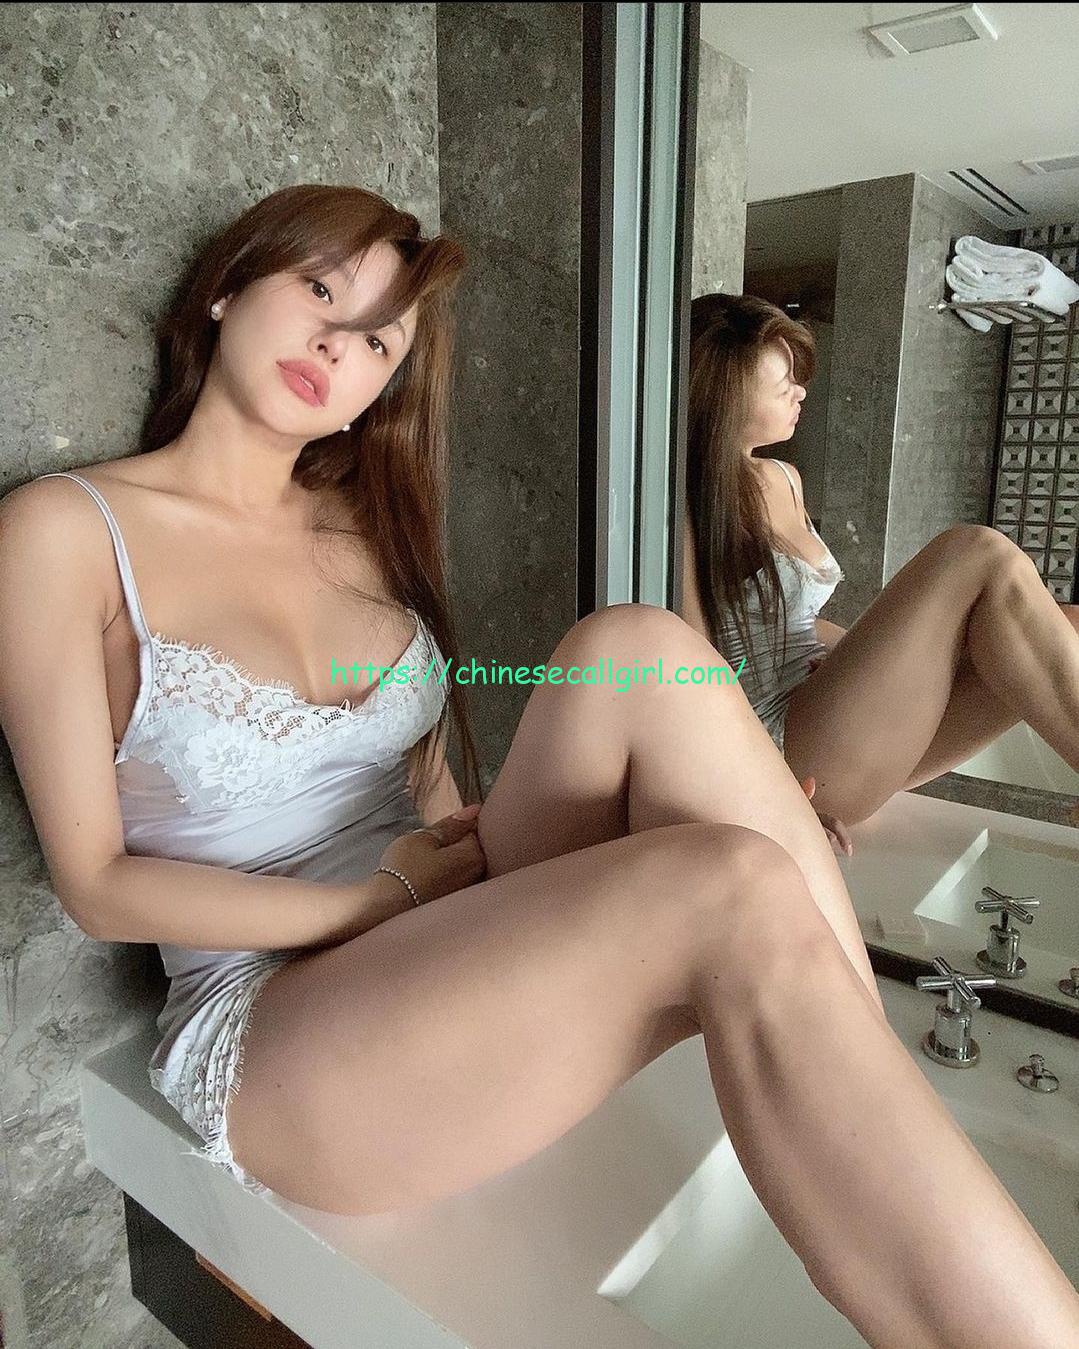 Coco Genting Highlands Escort Chinese Outcall Girl